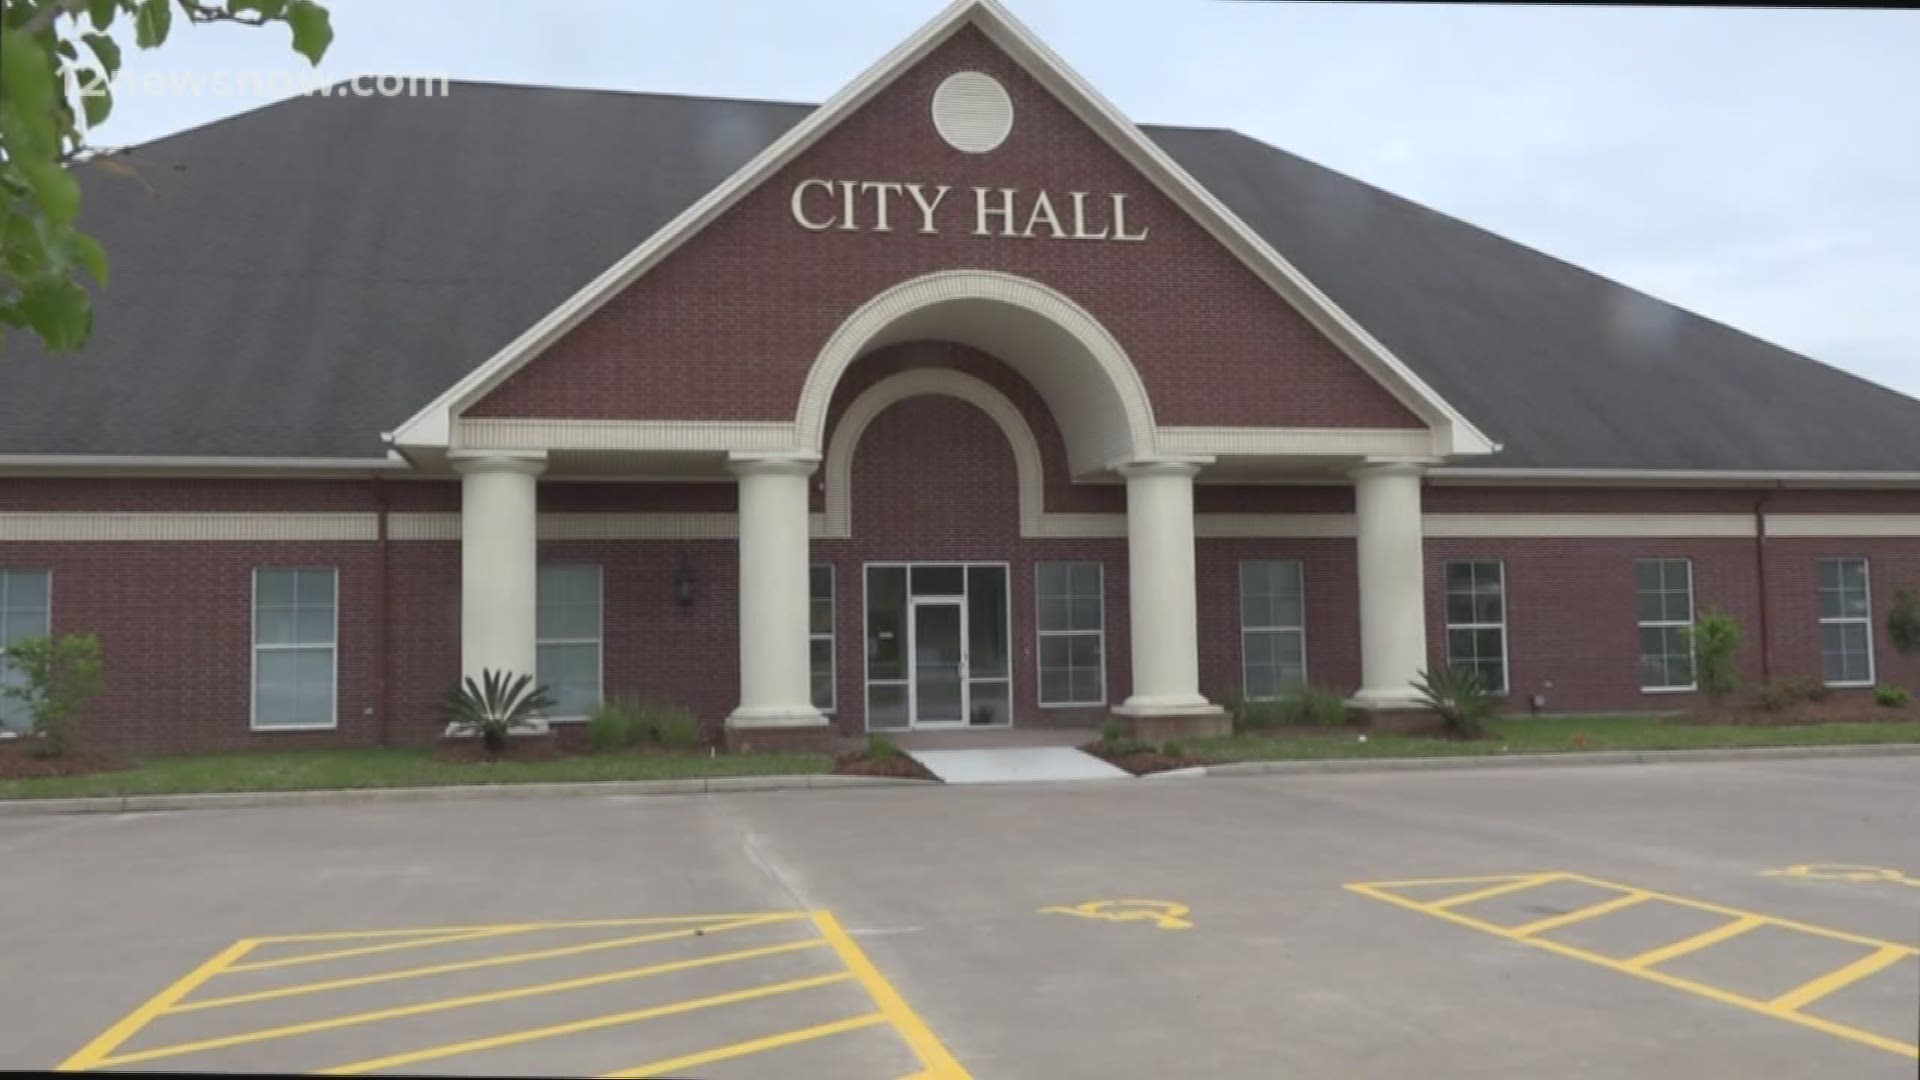 The city of Silsbee will move into a city hall mid May.